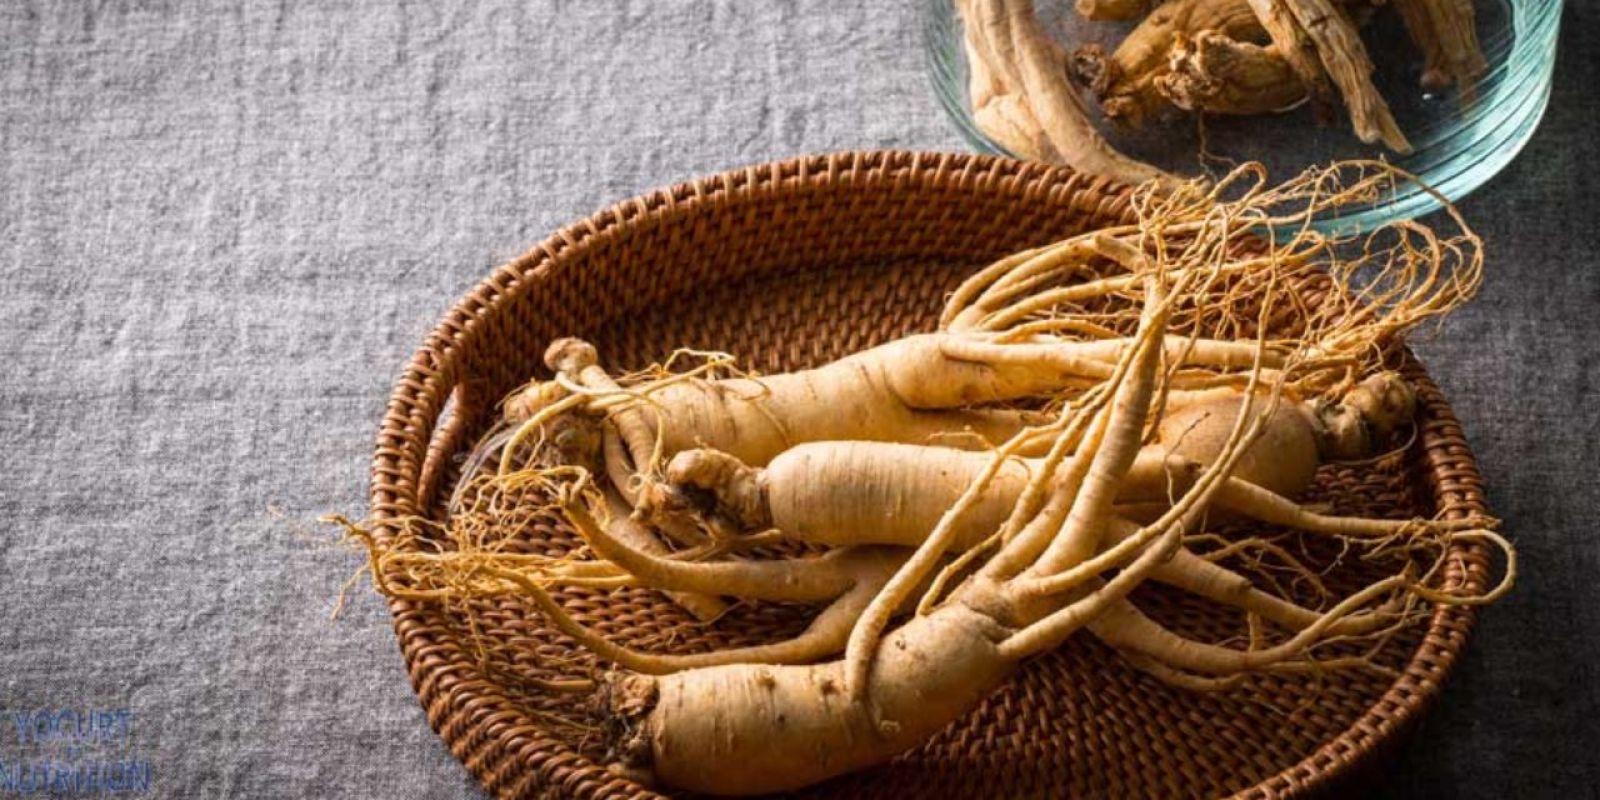 Relationship Between Ginseng & Your Scalp admin ajax.php?action=kernel&p=image&src=%7B%22file%22%3A%22wp content%2Fuploads%2F2020%2F12%2Fpurcorganics ginseng